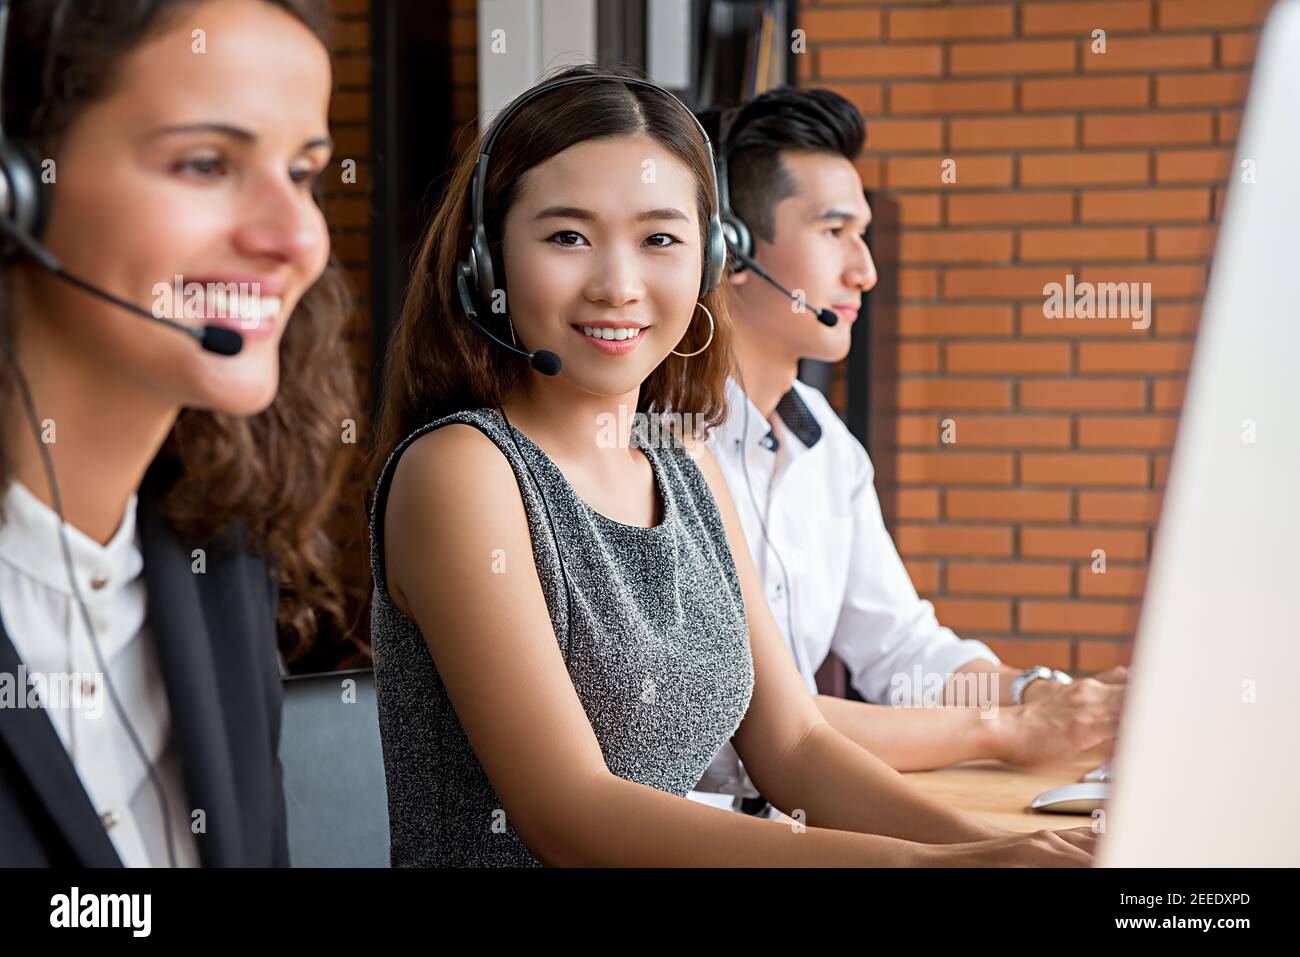 Smiling Asian female telemarketing customer service agent working in call center with multi-ethnic team Stock Photo